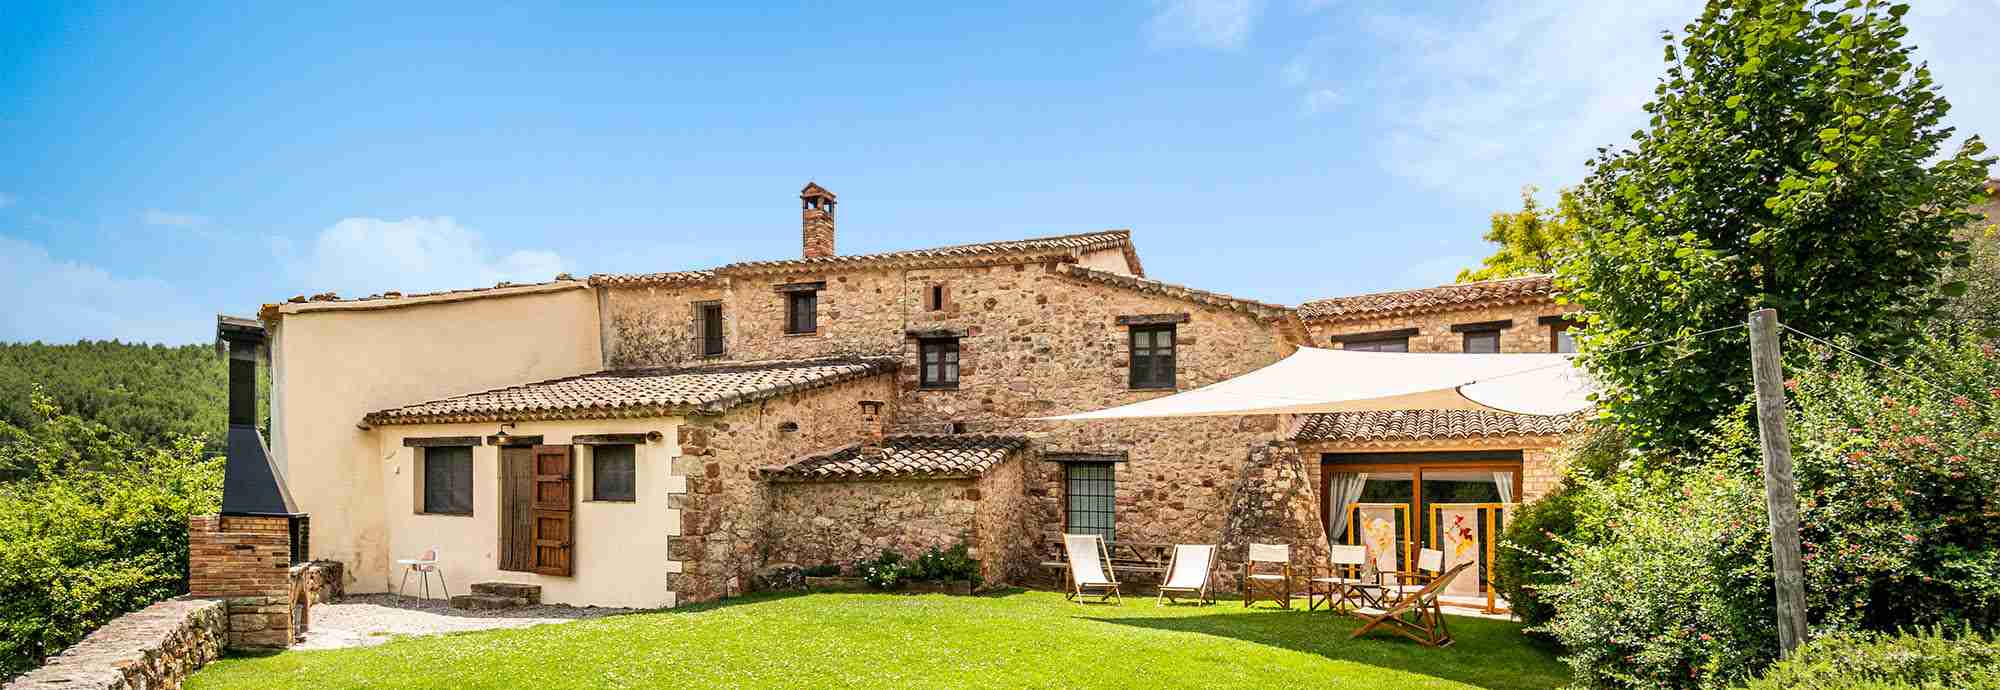 Quality family villa with gated pool and gardens, Catalonia